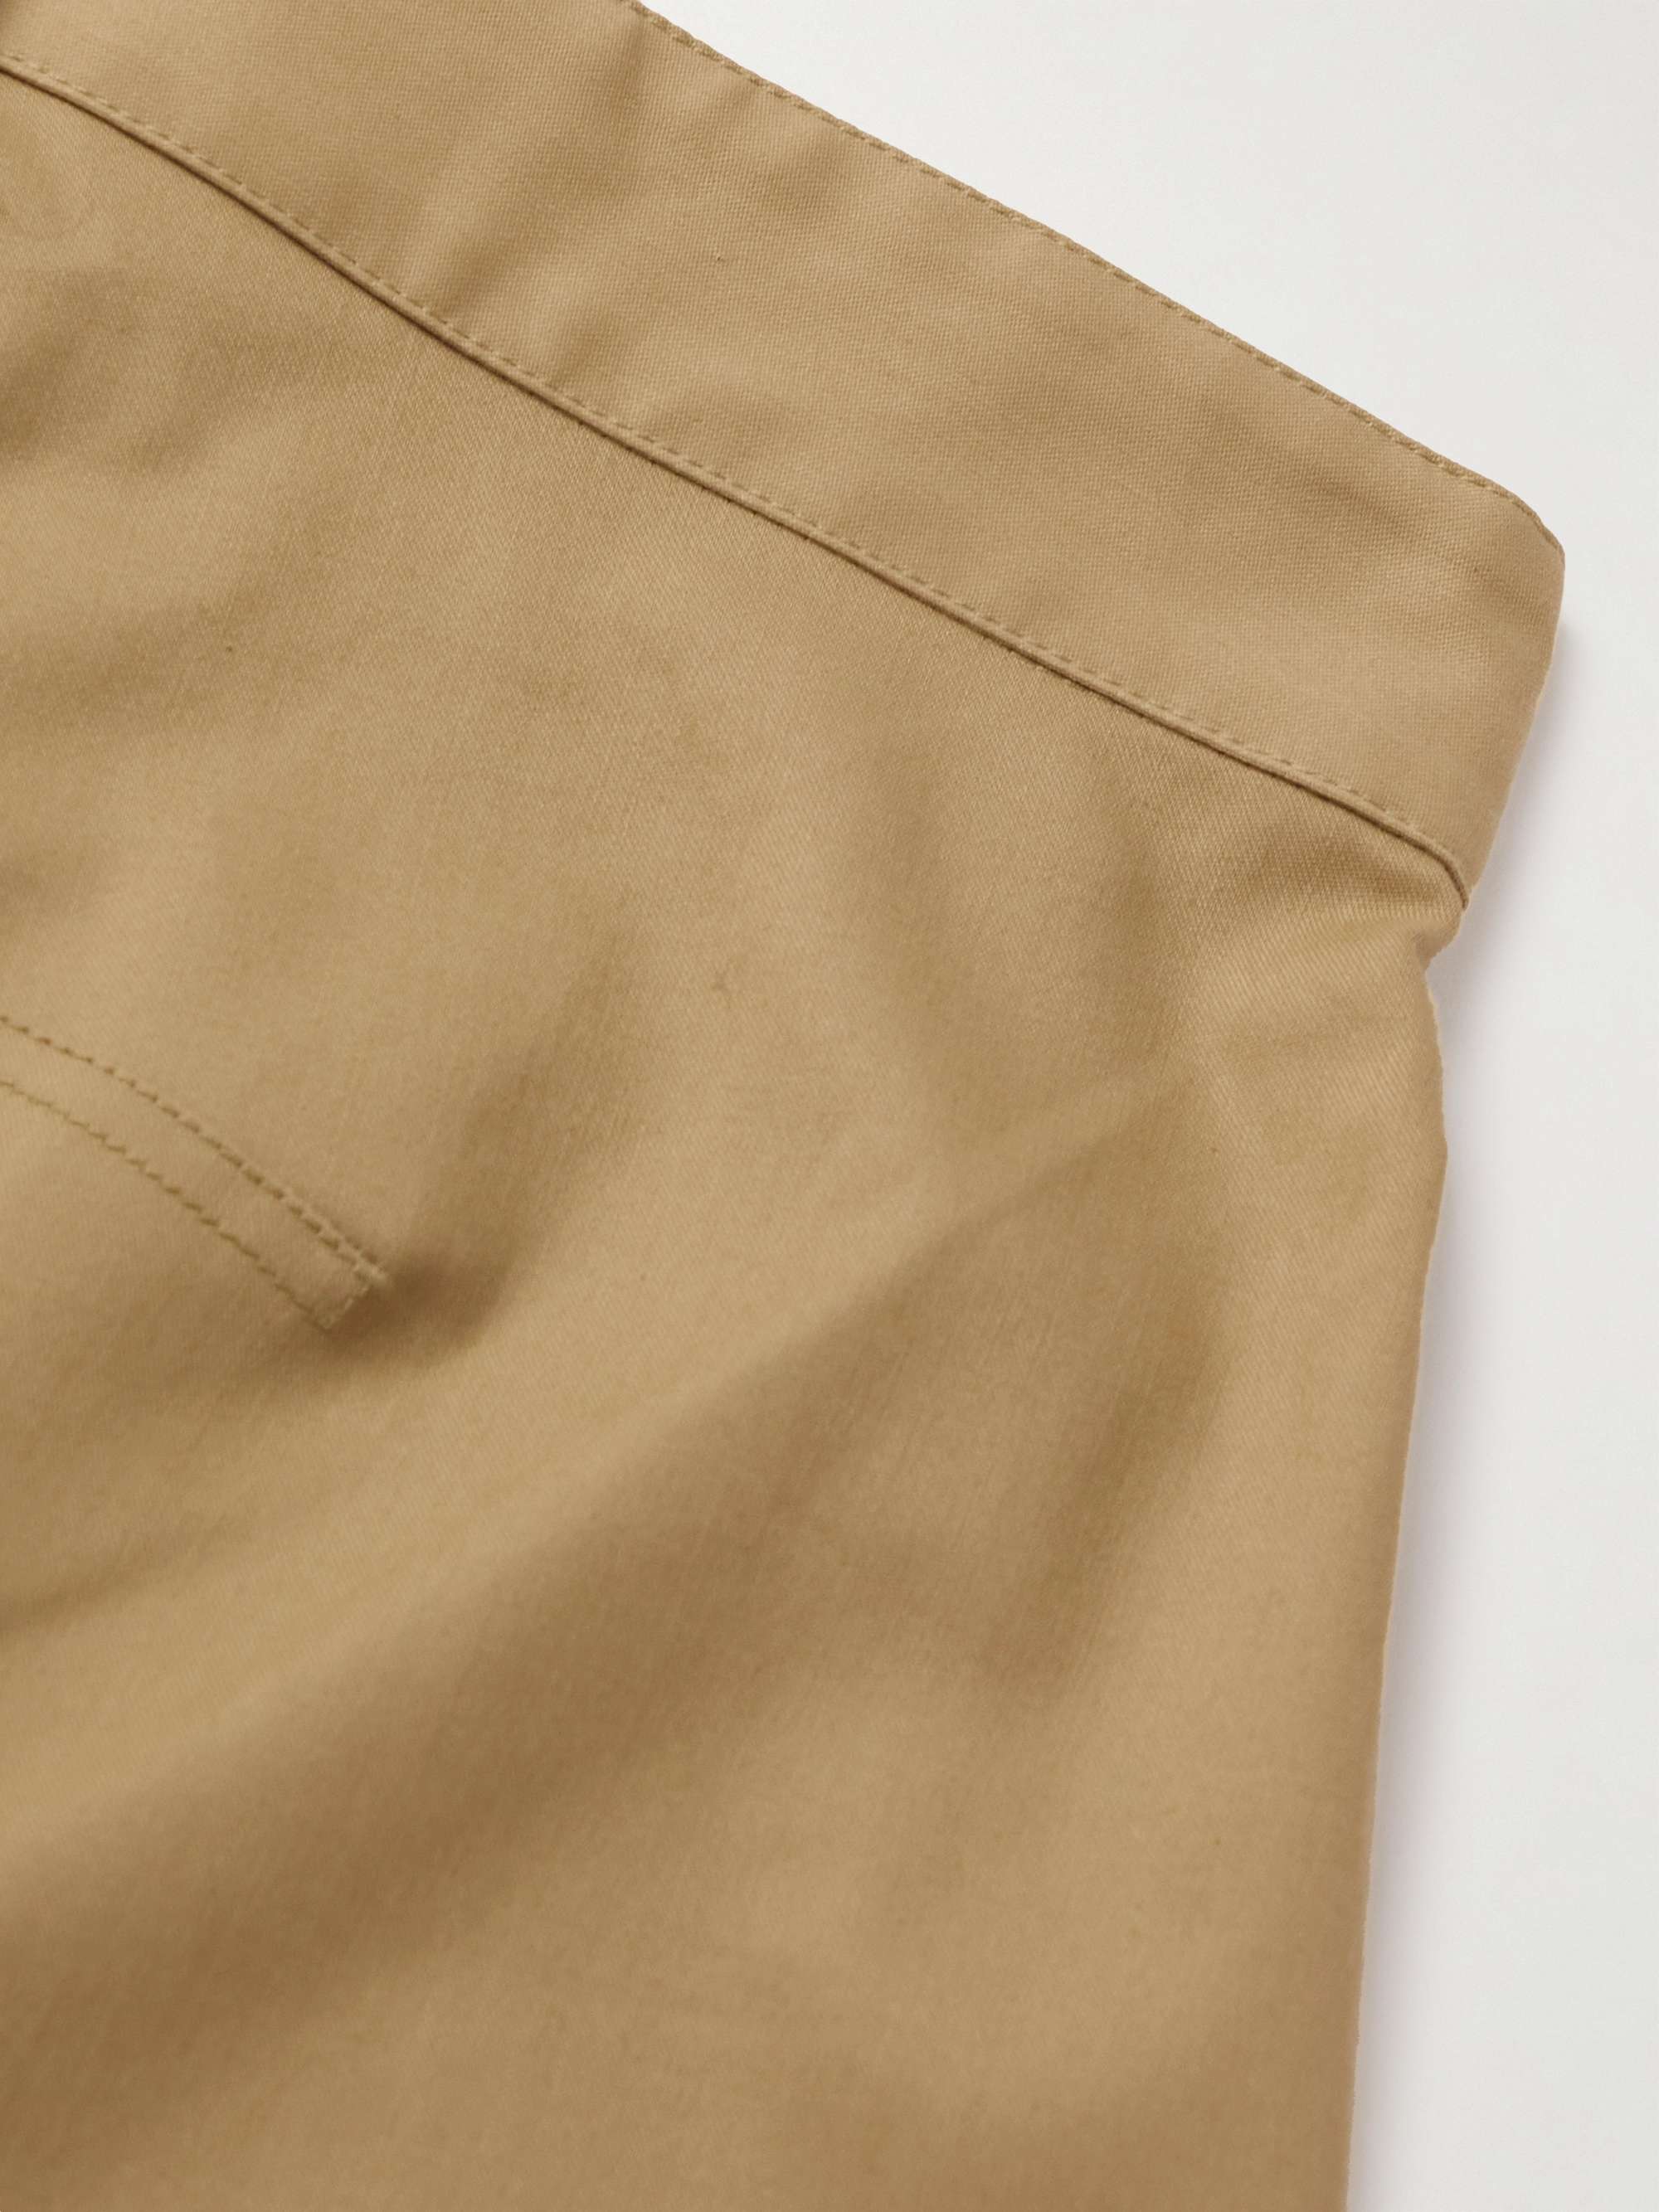 JW ANDERSON Twisted Straight-Leg Cotton-Sateen Shorts